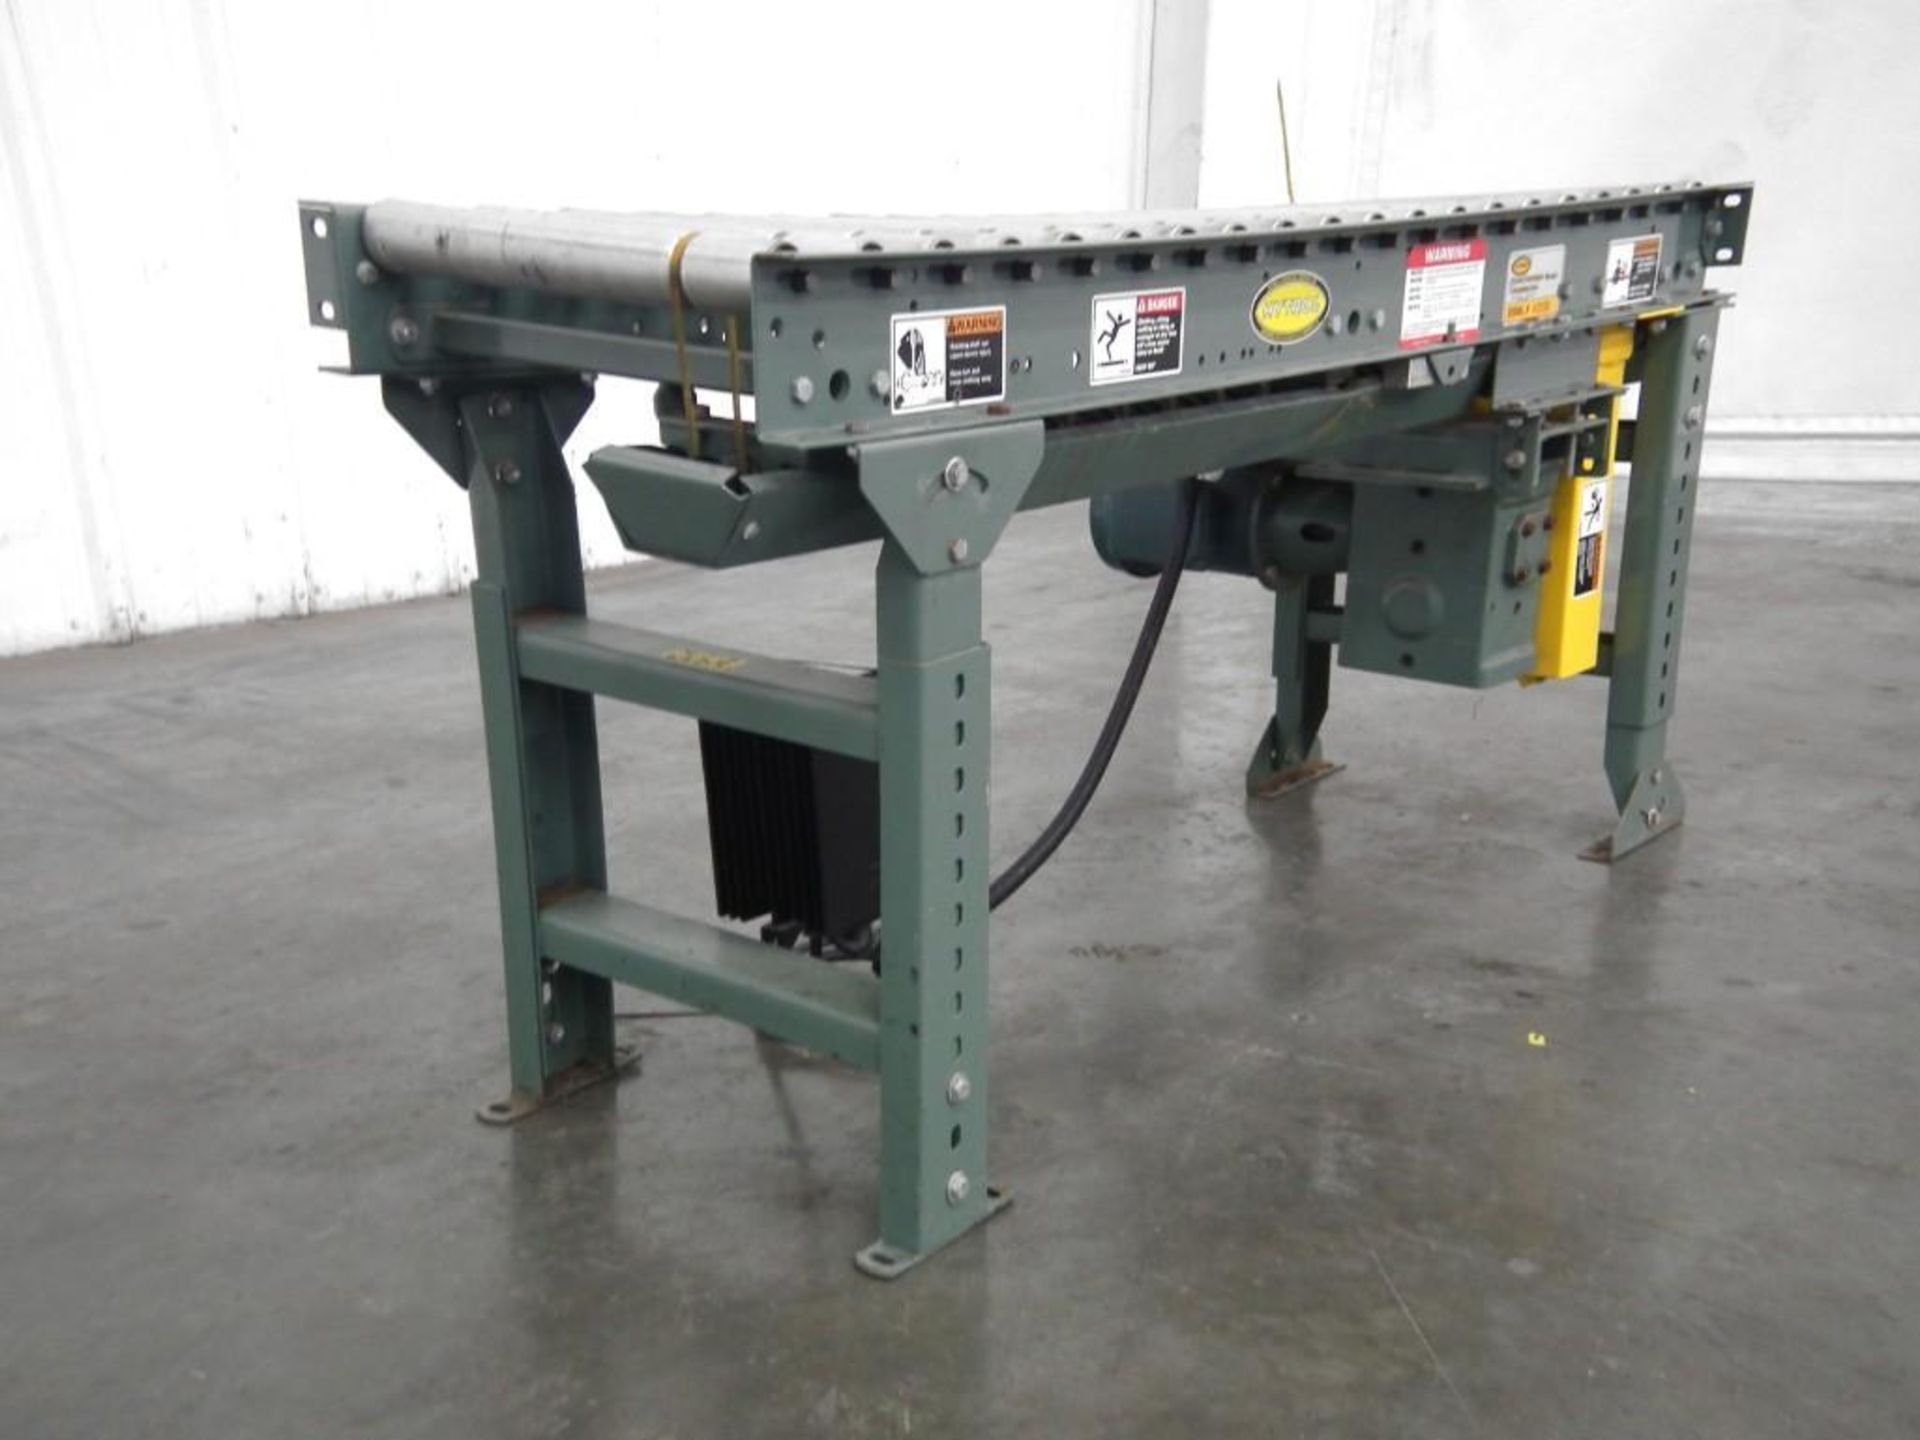 Hytrol 14 Inches Wide x 62 Inches Long Conveyor - Image 10 of 13